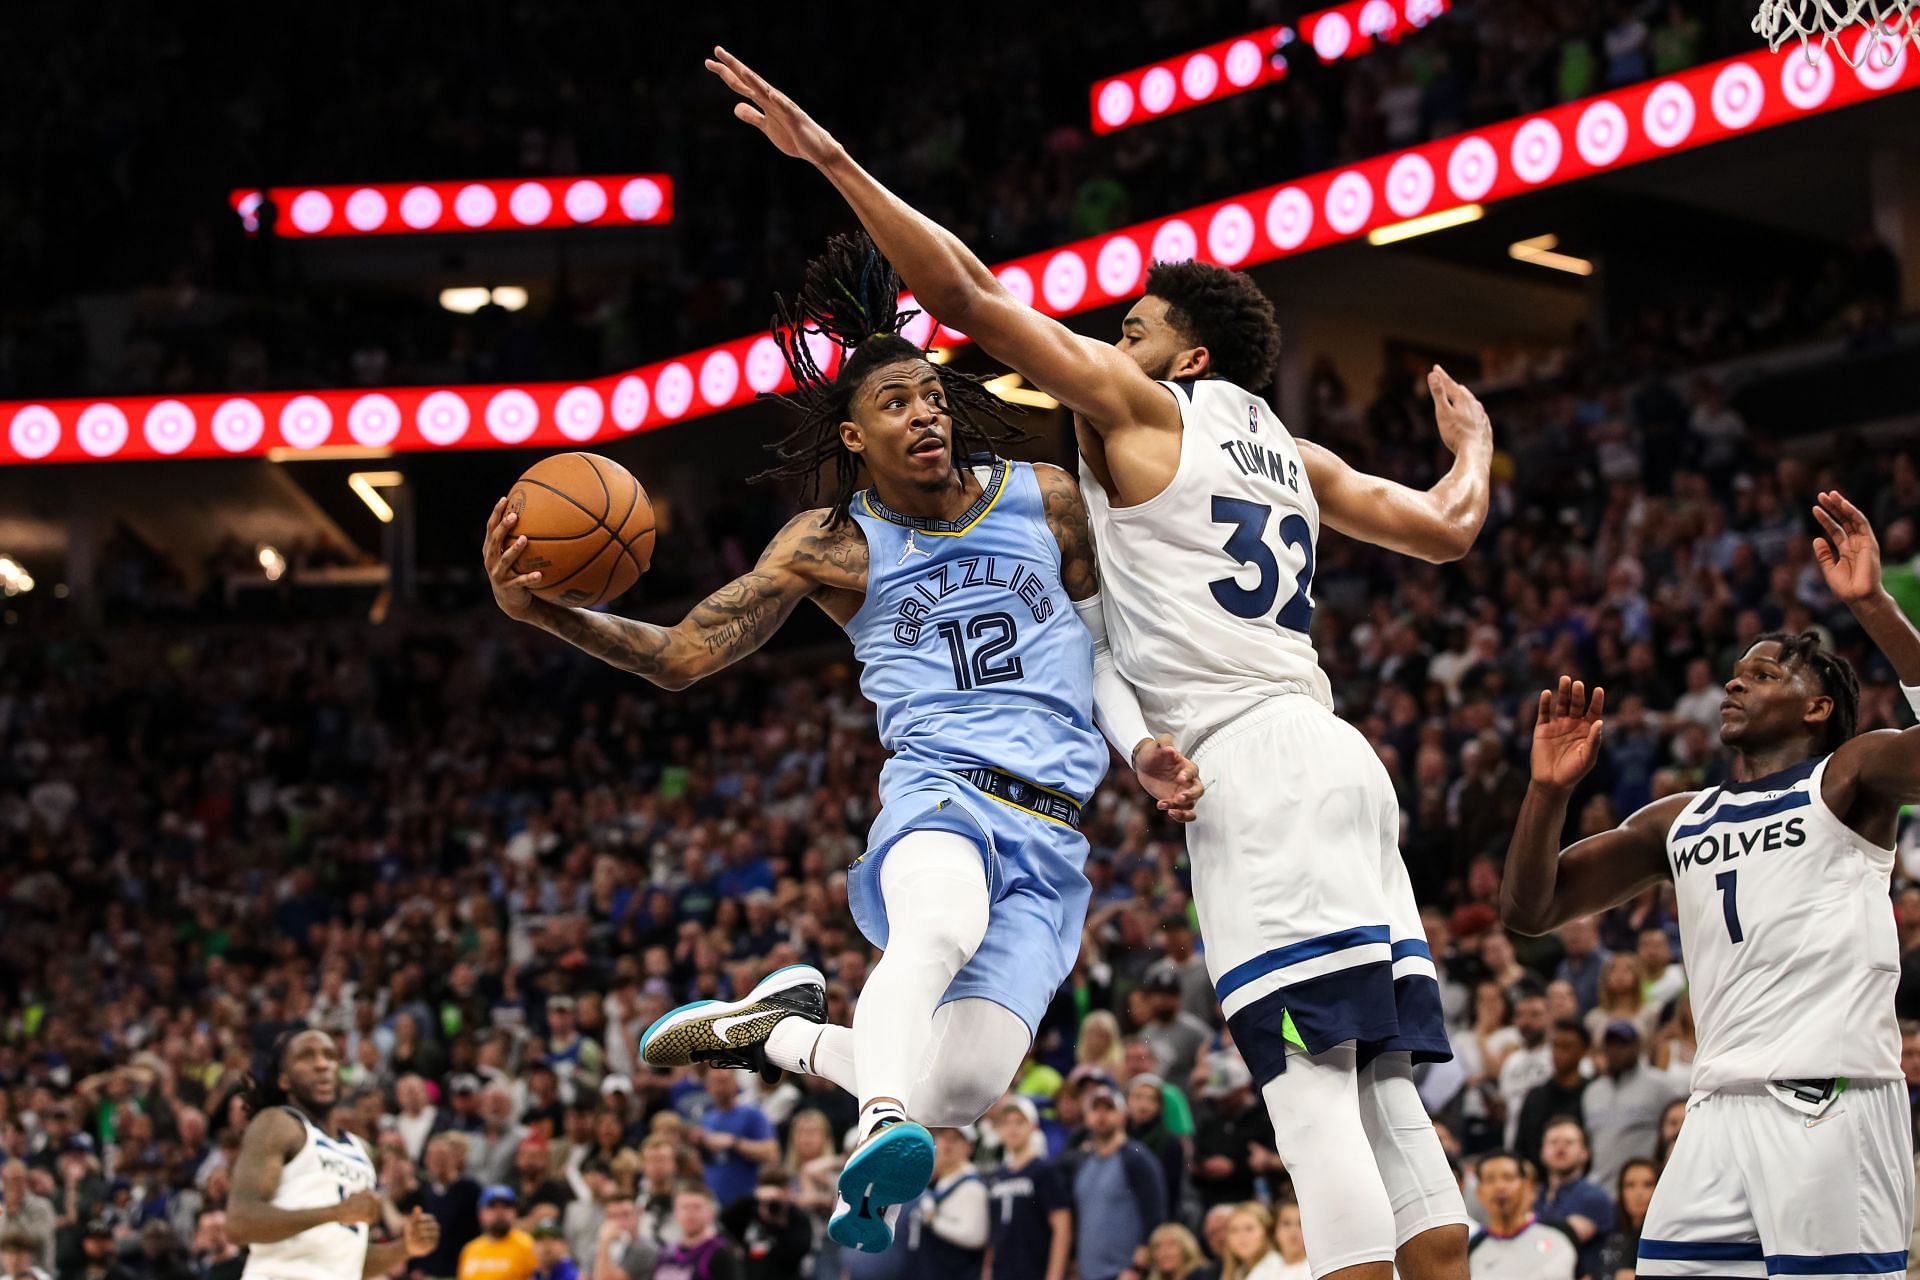 Ja Morant of the Memphis Grizzlies goes up for a shot while Karl-Anthony Towns of the Minnesota Timberwolves defends.